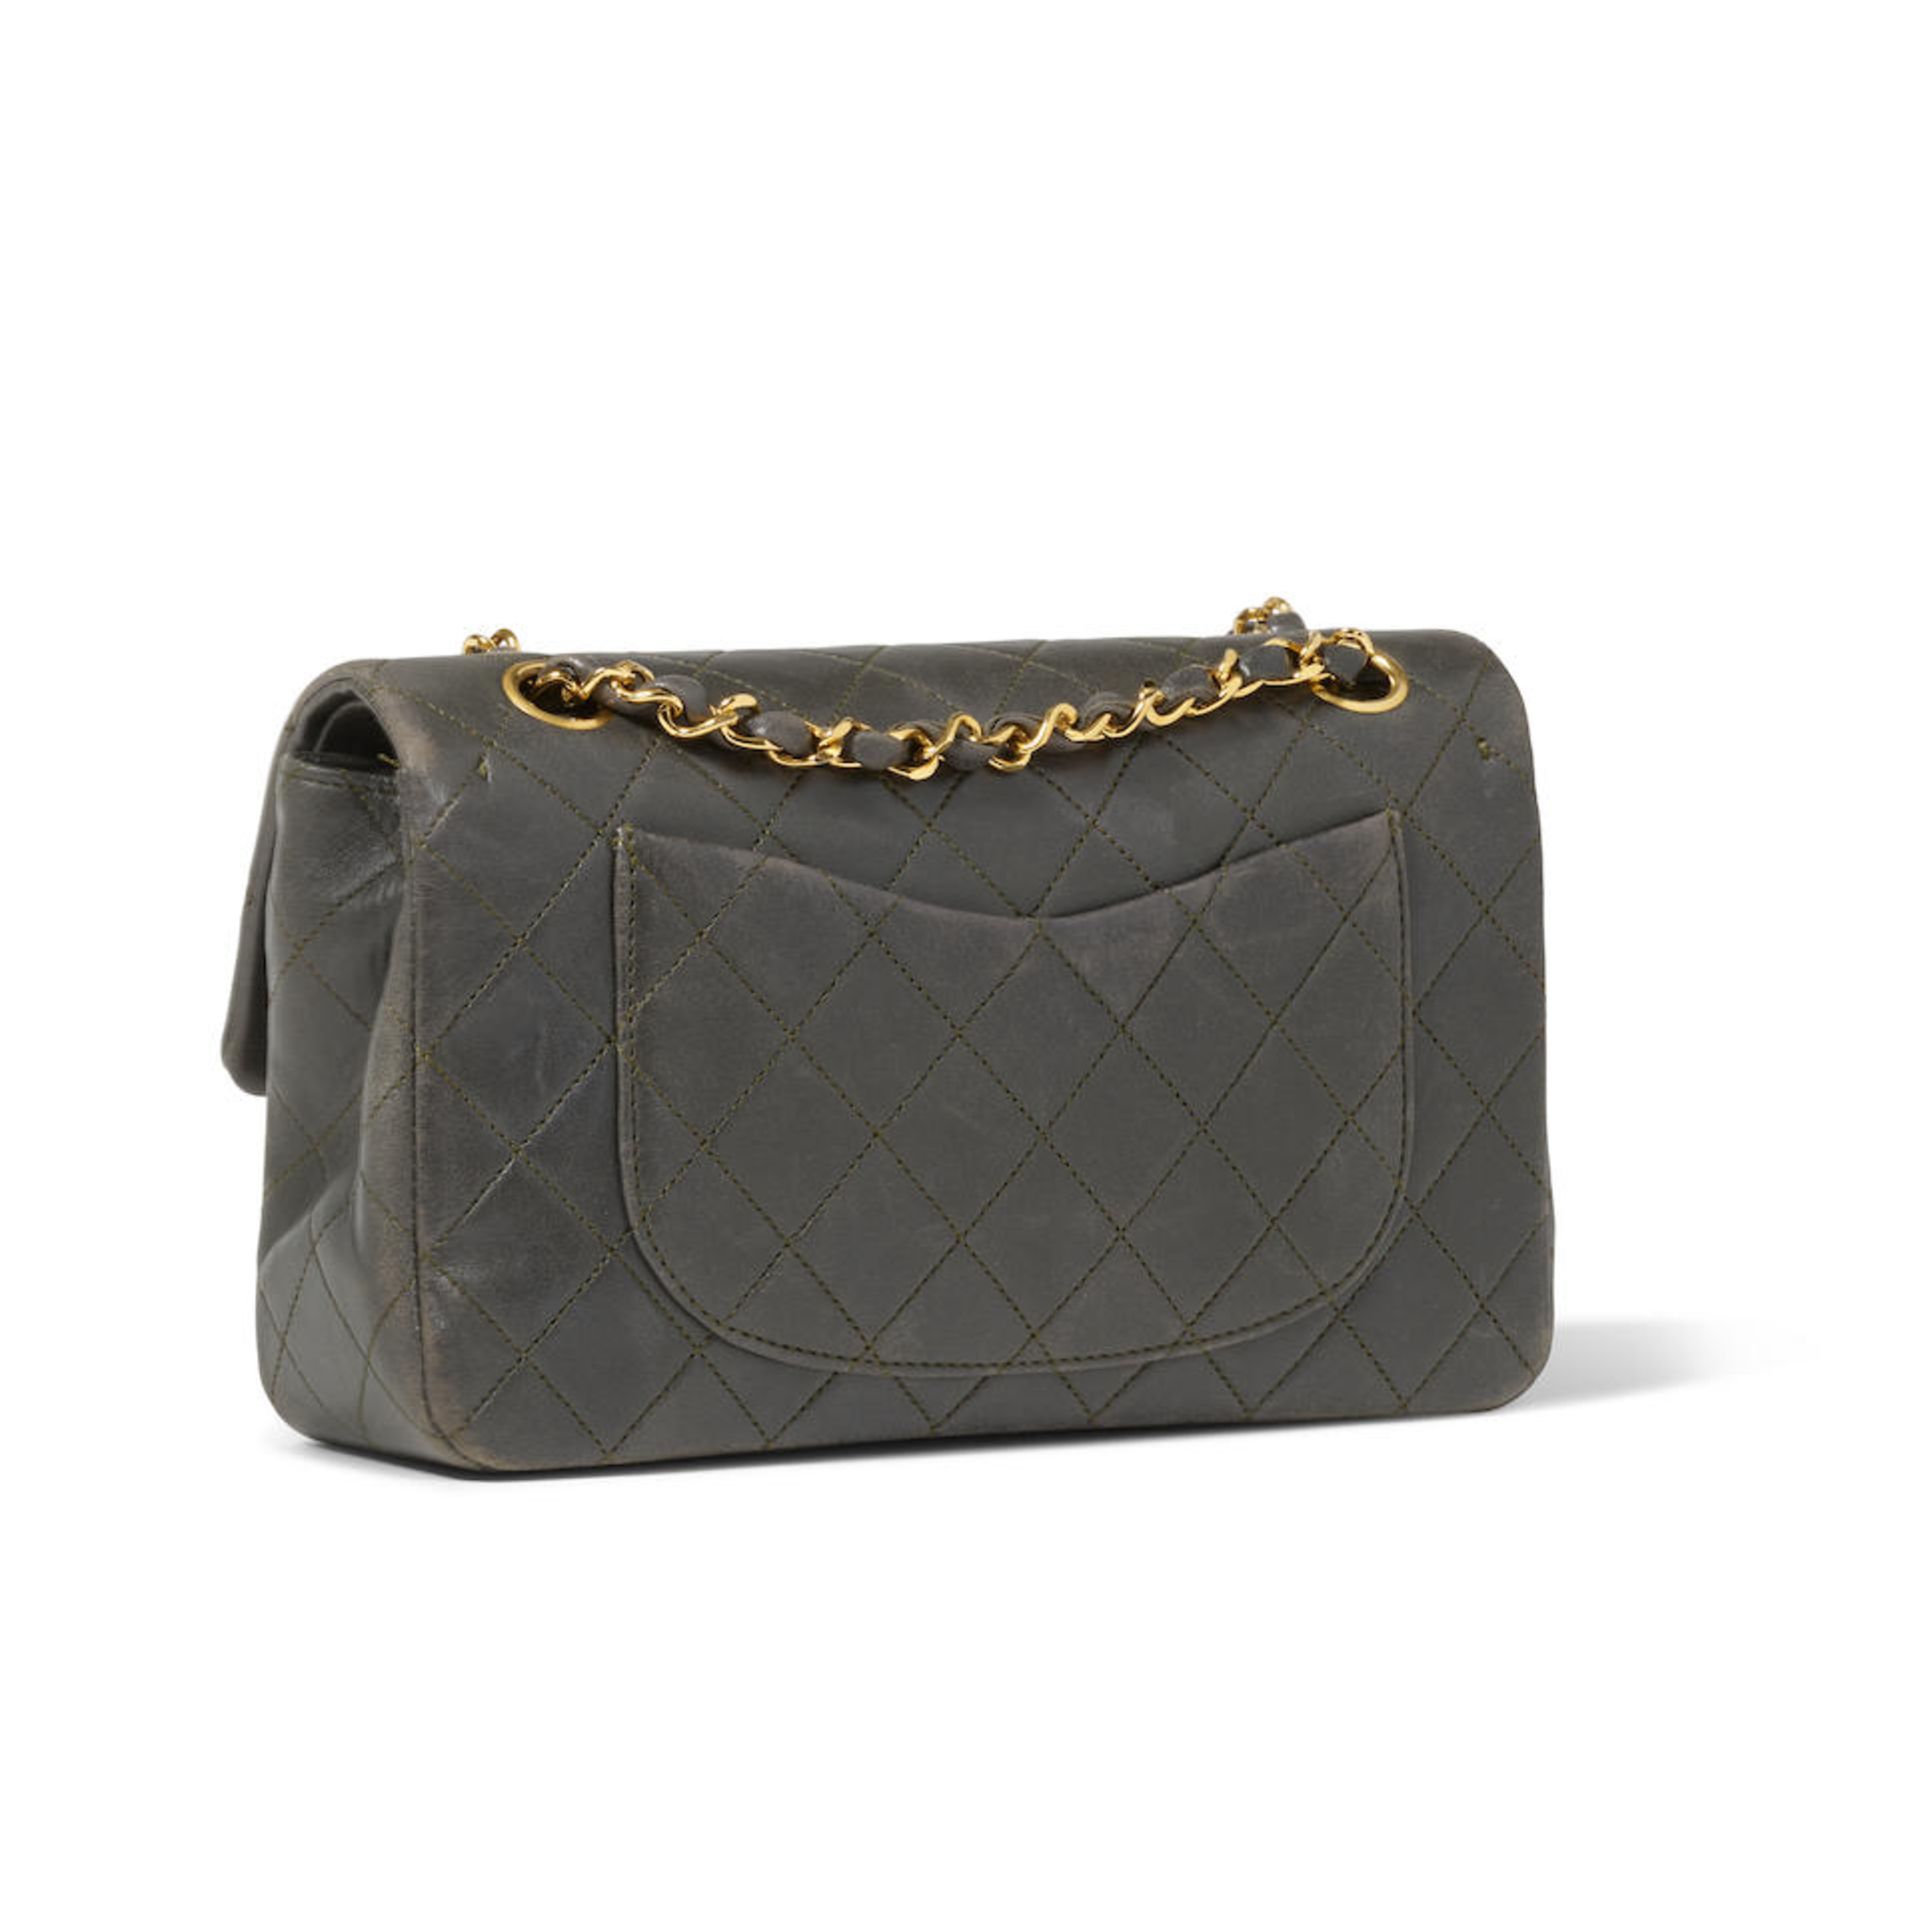 CHANEL: SMALL DOUBLE FLAP CLASSIC BAG 1989-1991 - Image 2 of 2